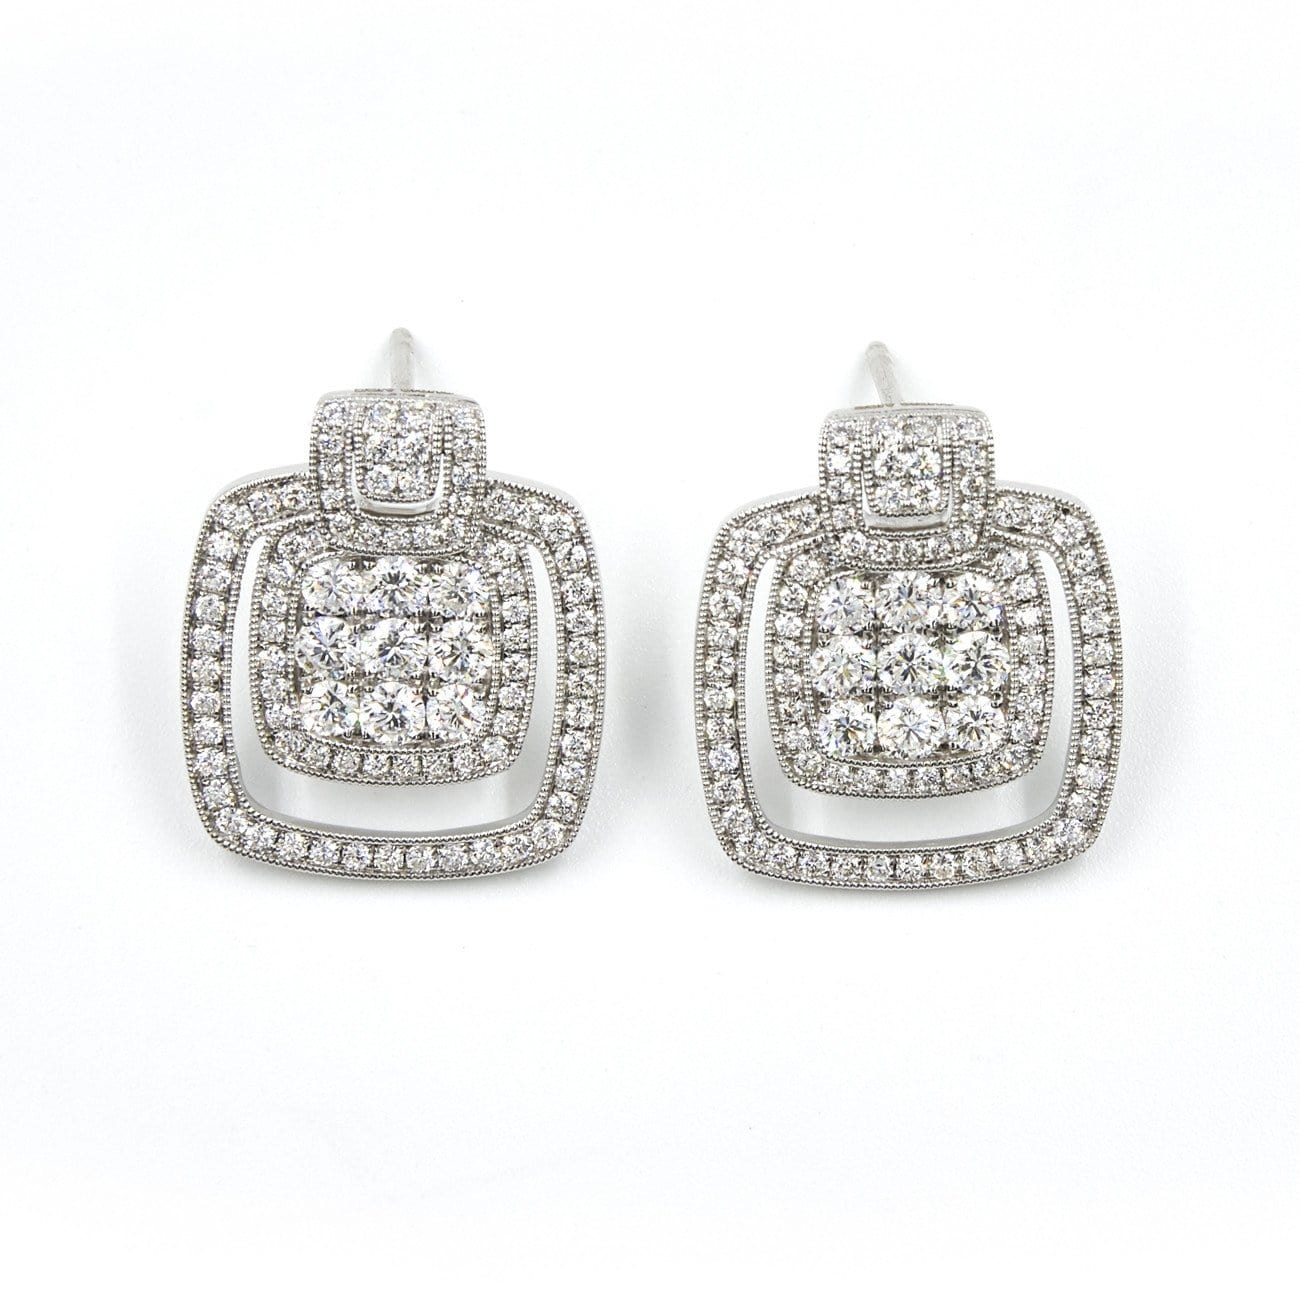 HEIRESS-DIAMOND EARRINGS - Chris Aire Fine Jewelry & Timepieces